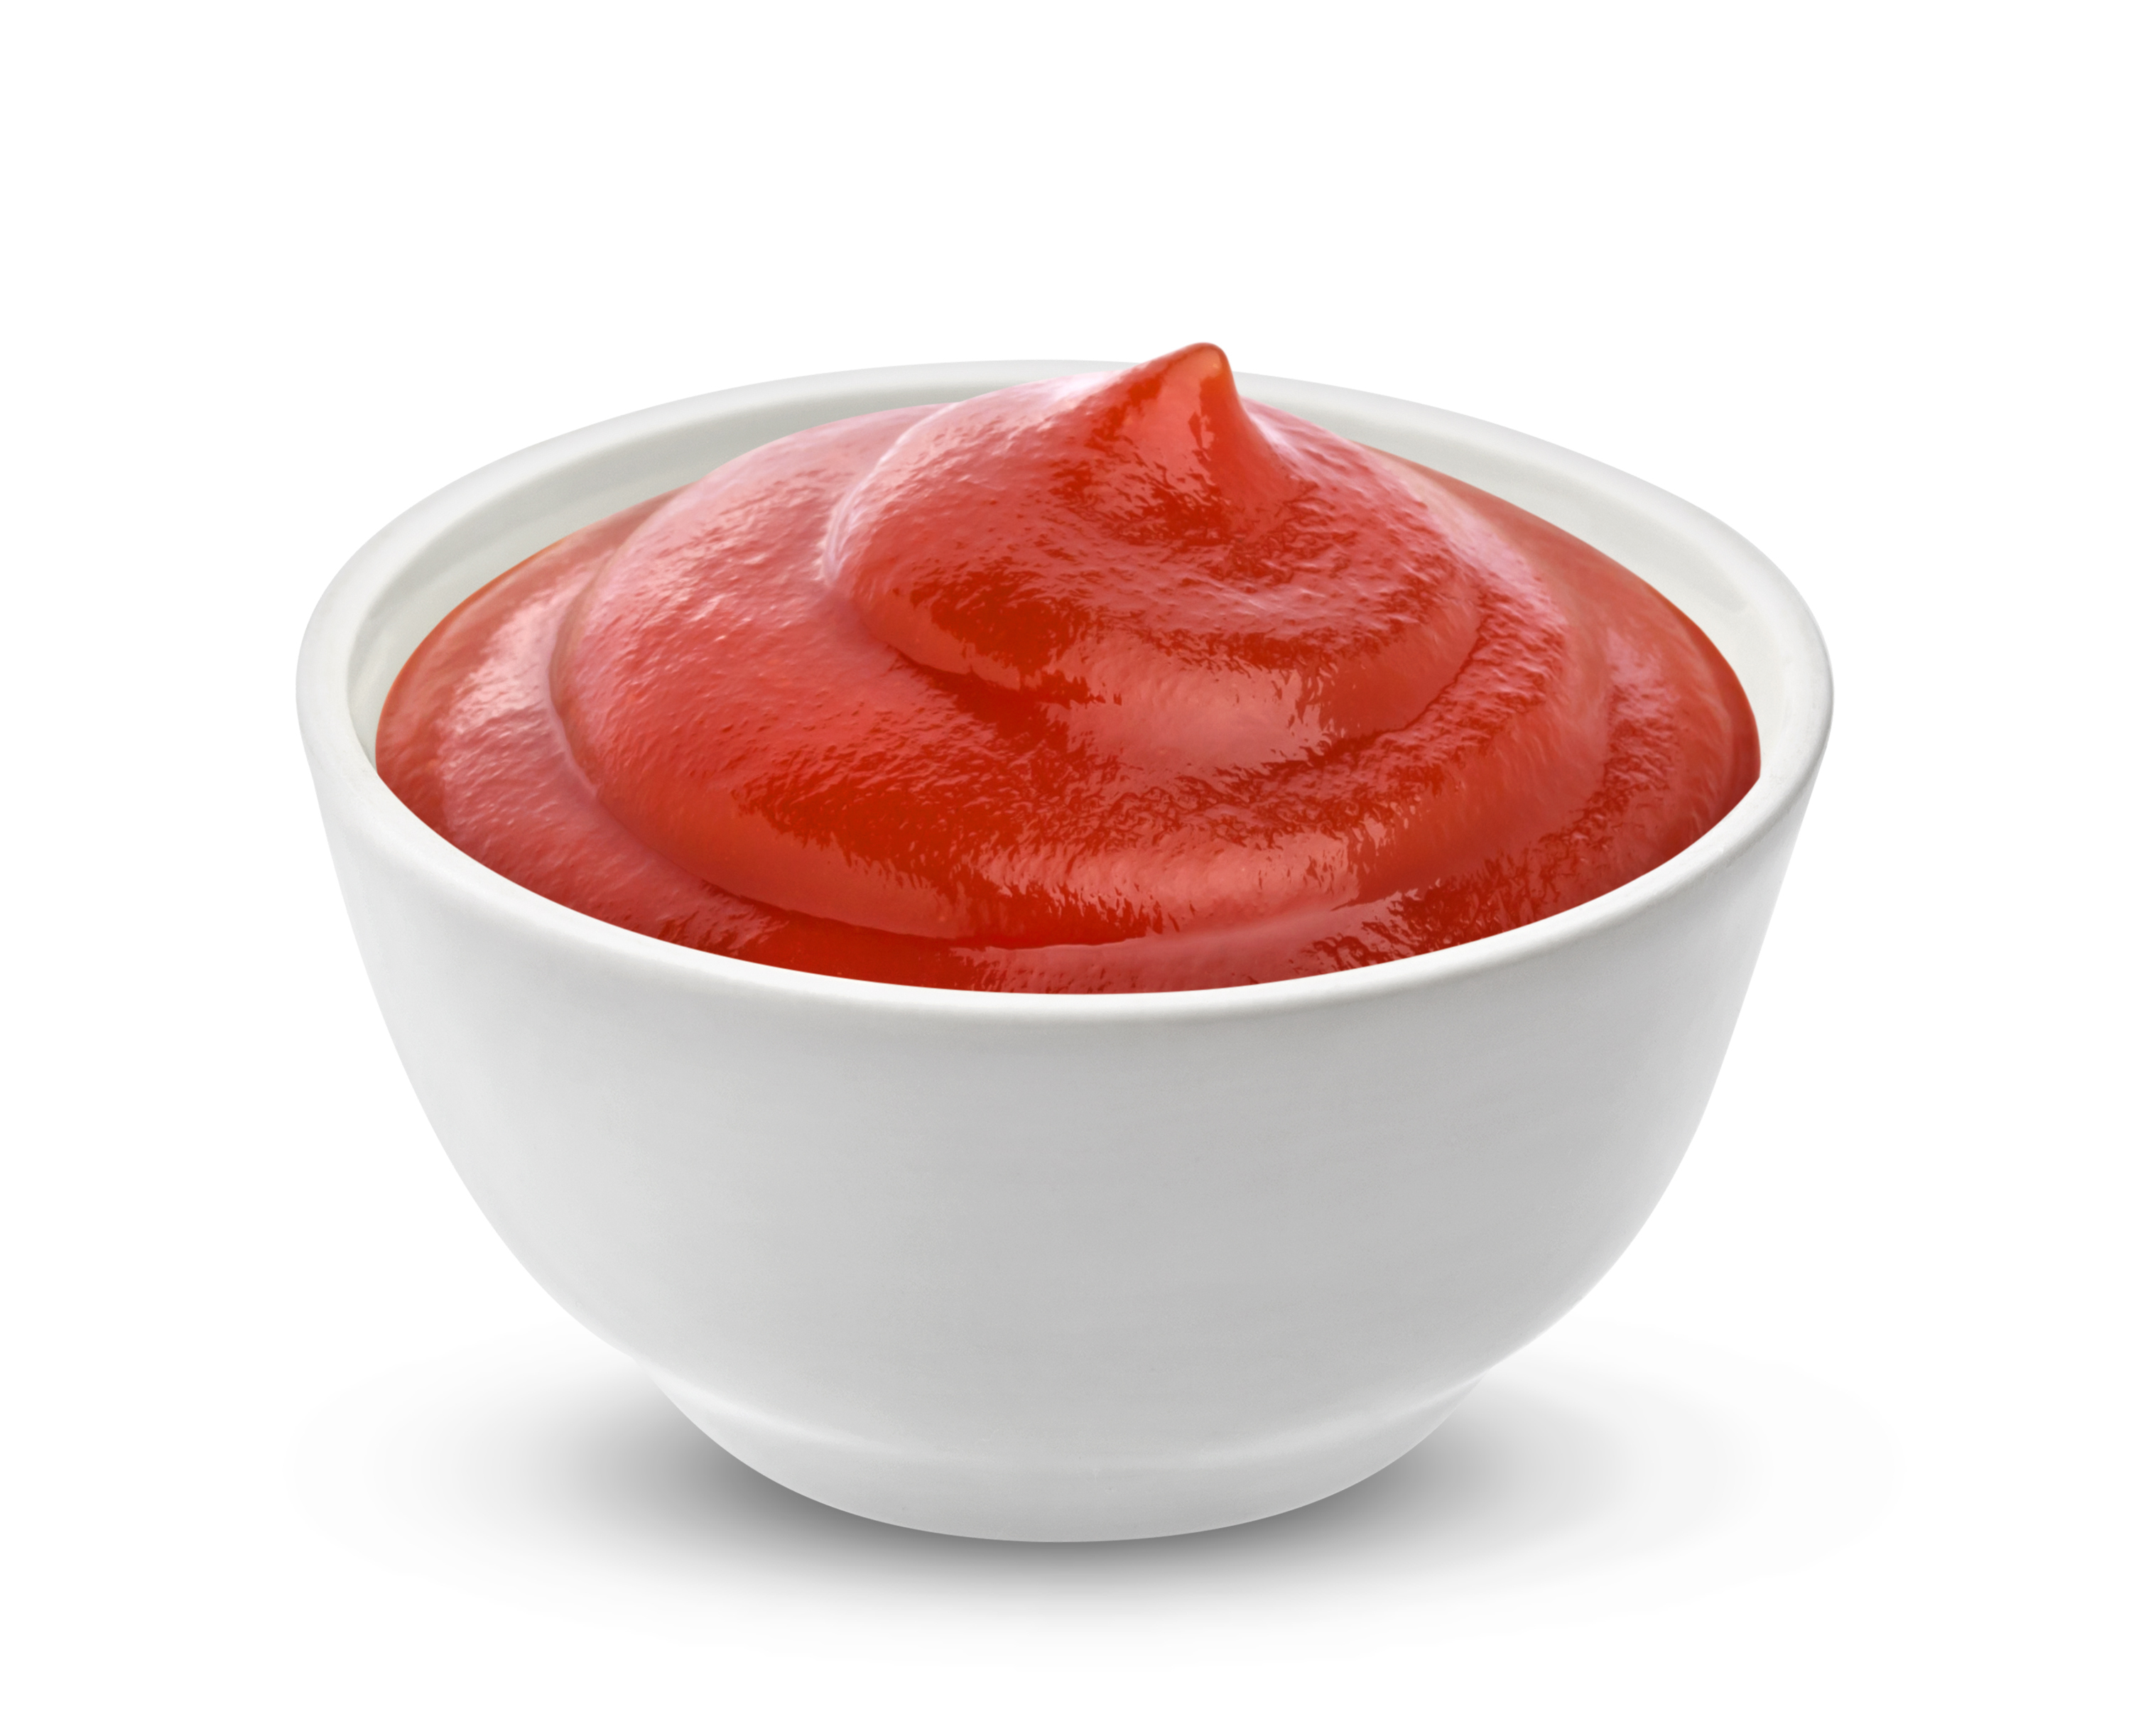 A white bowl filled with ketchup | Source: Shutterstock